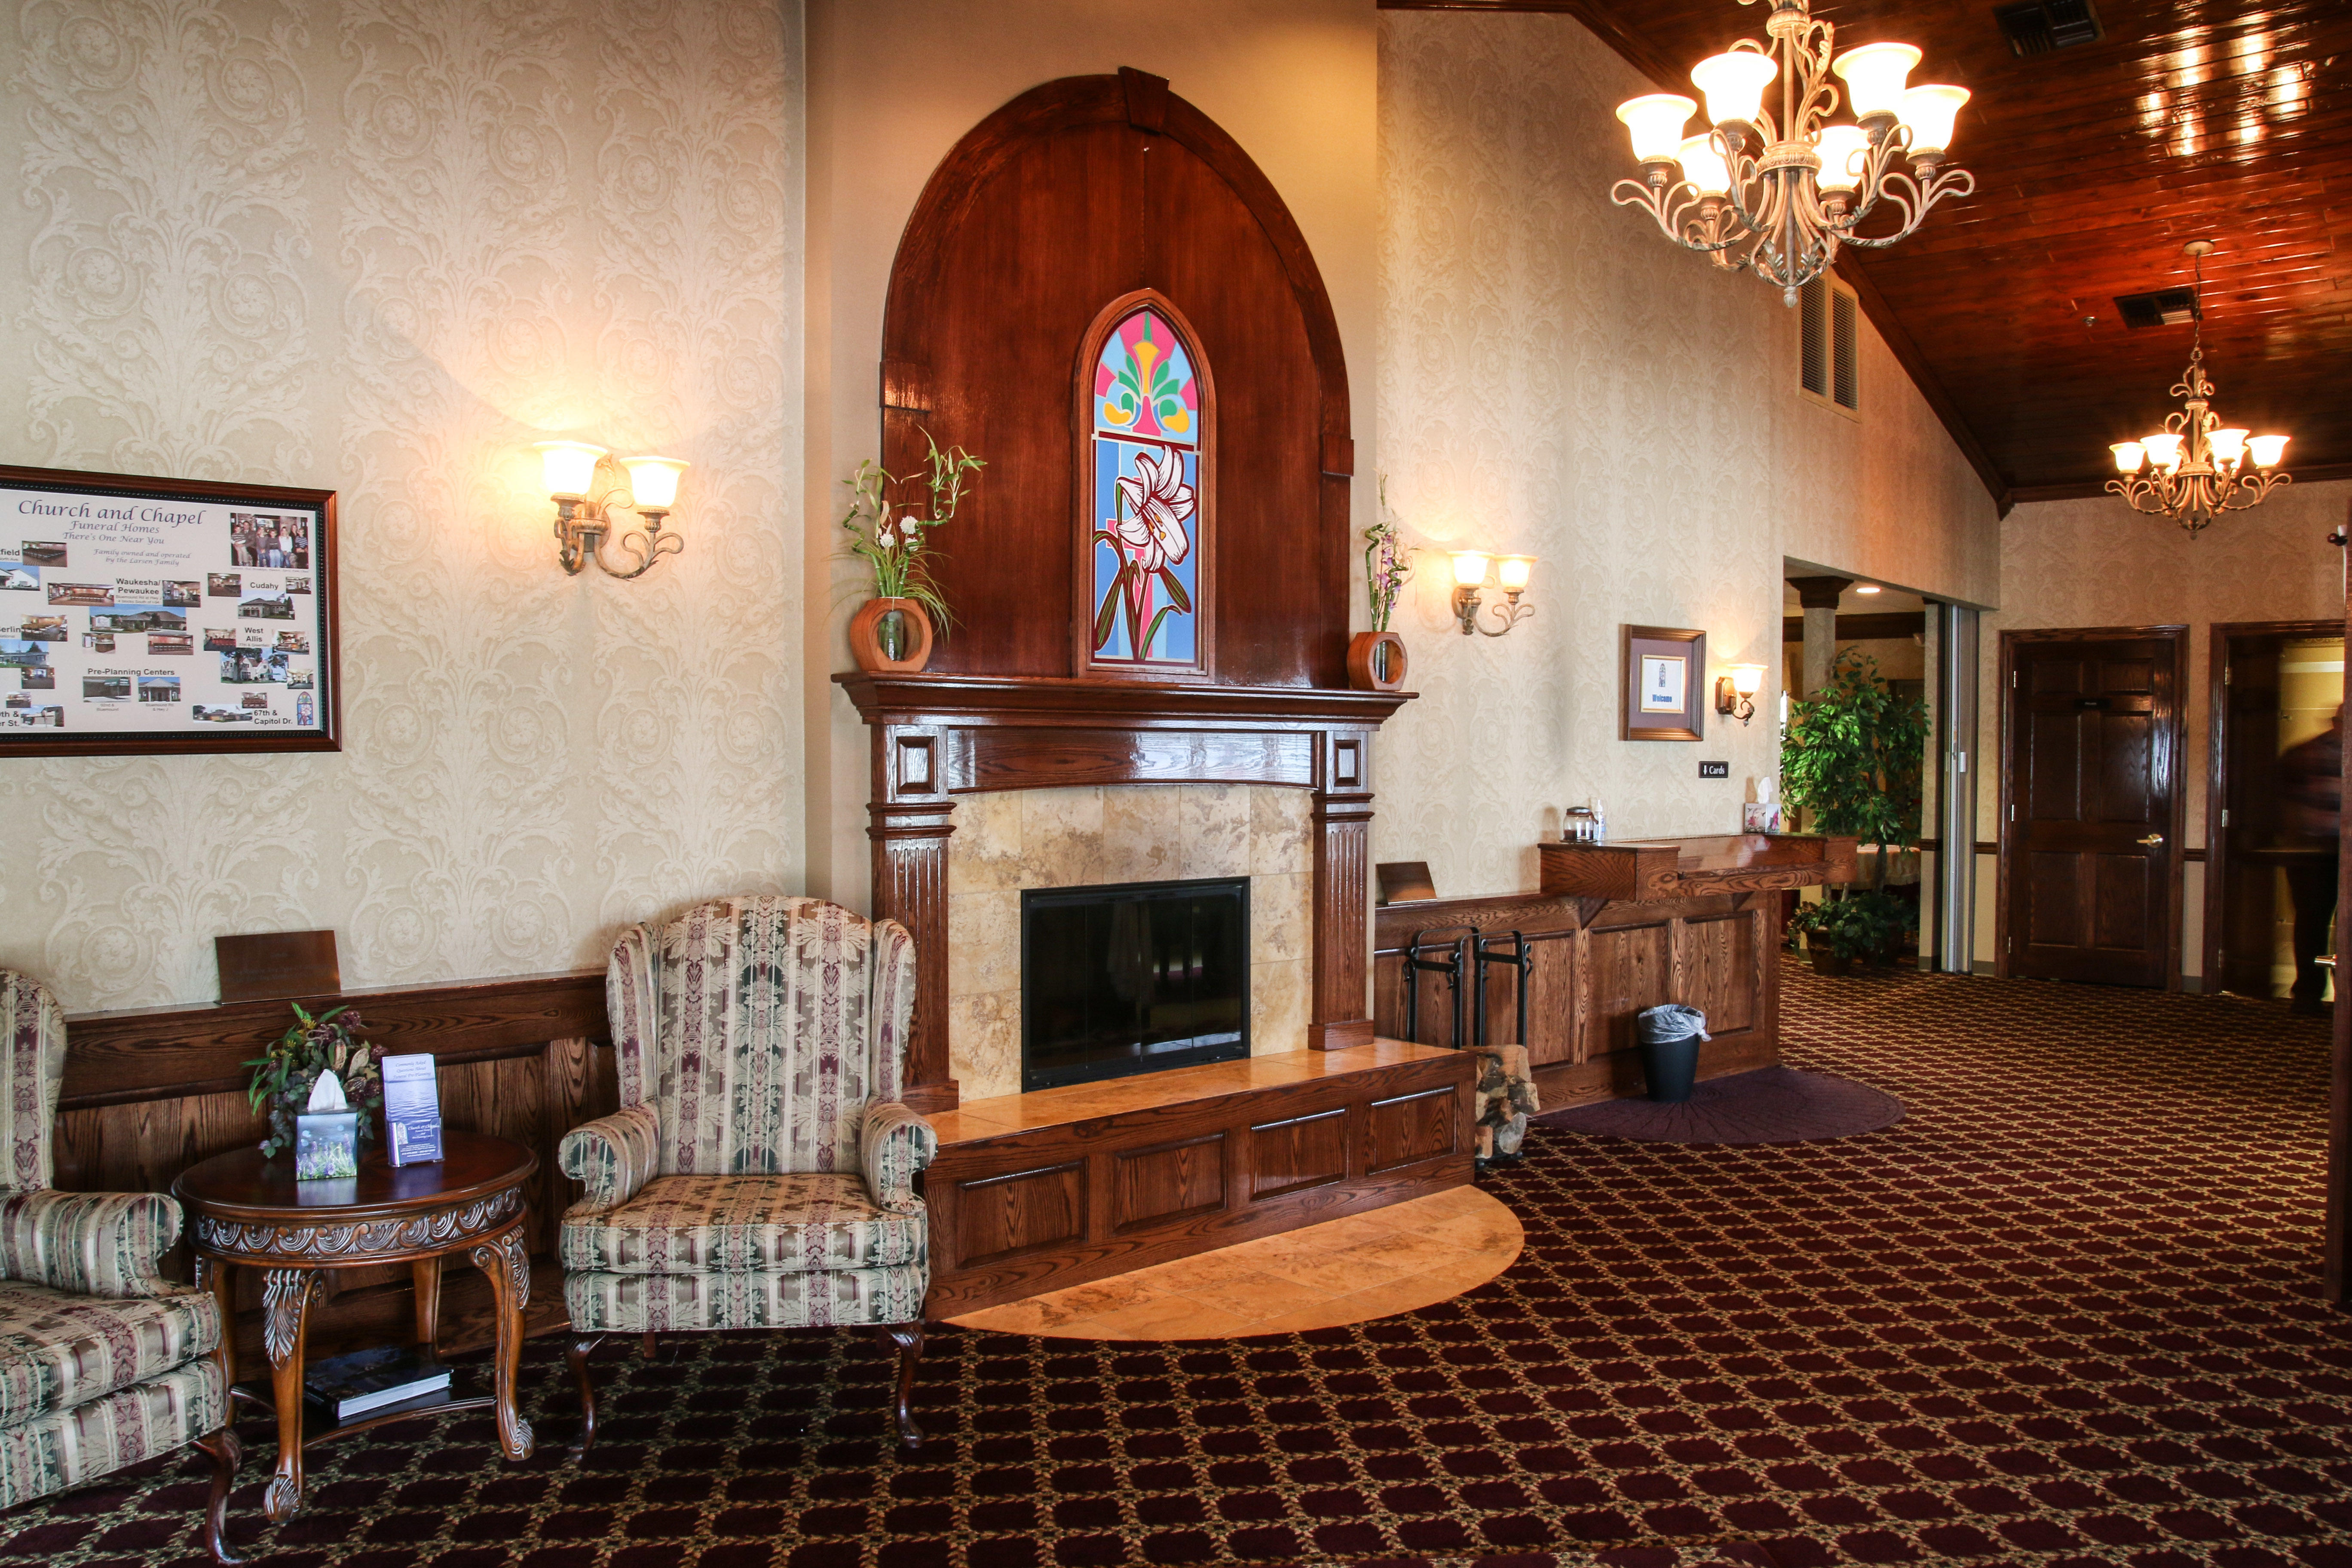 Church and Chapel Funeral Homes Photo